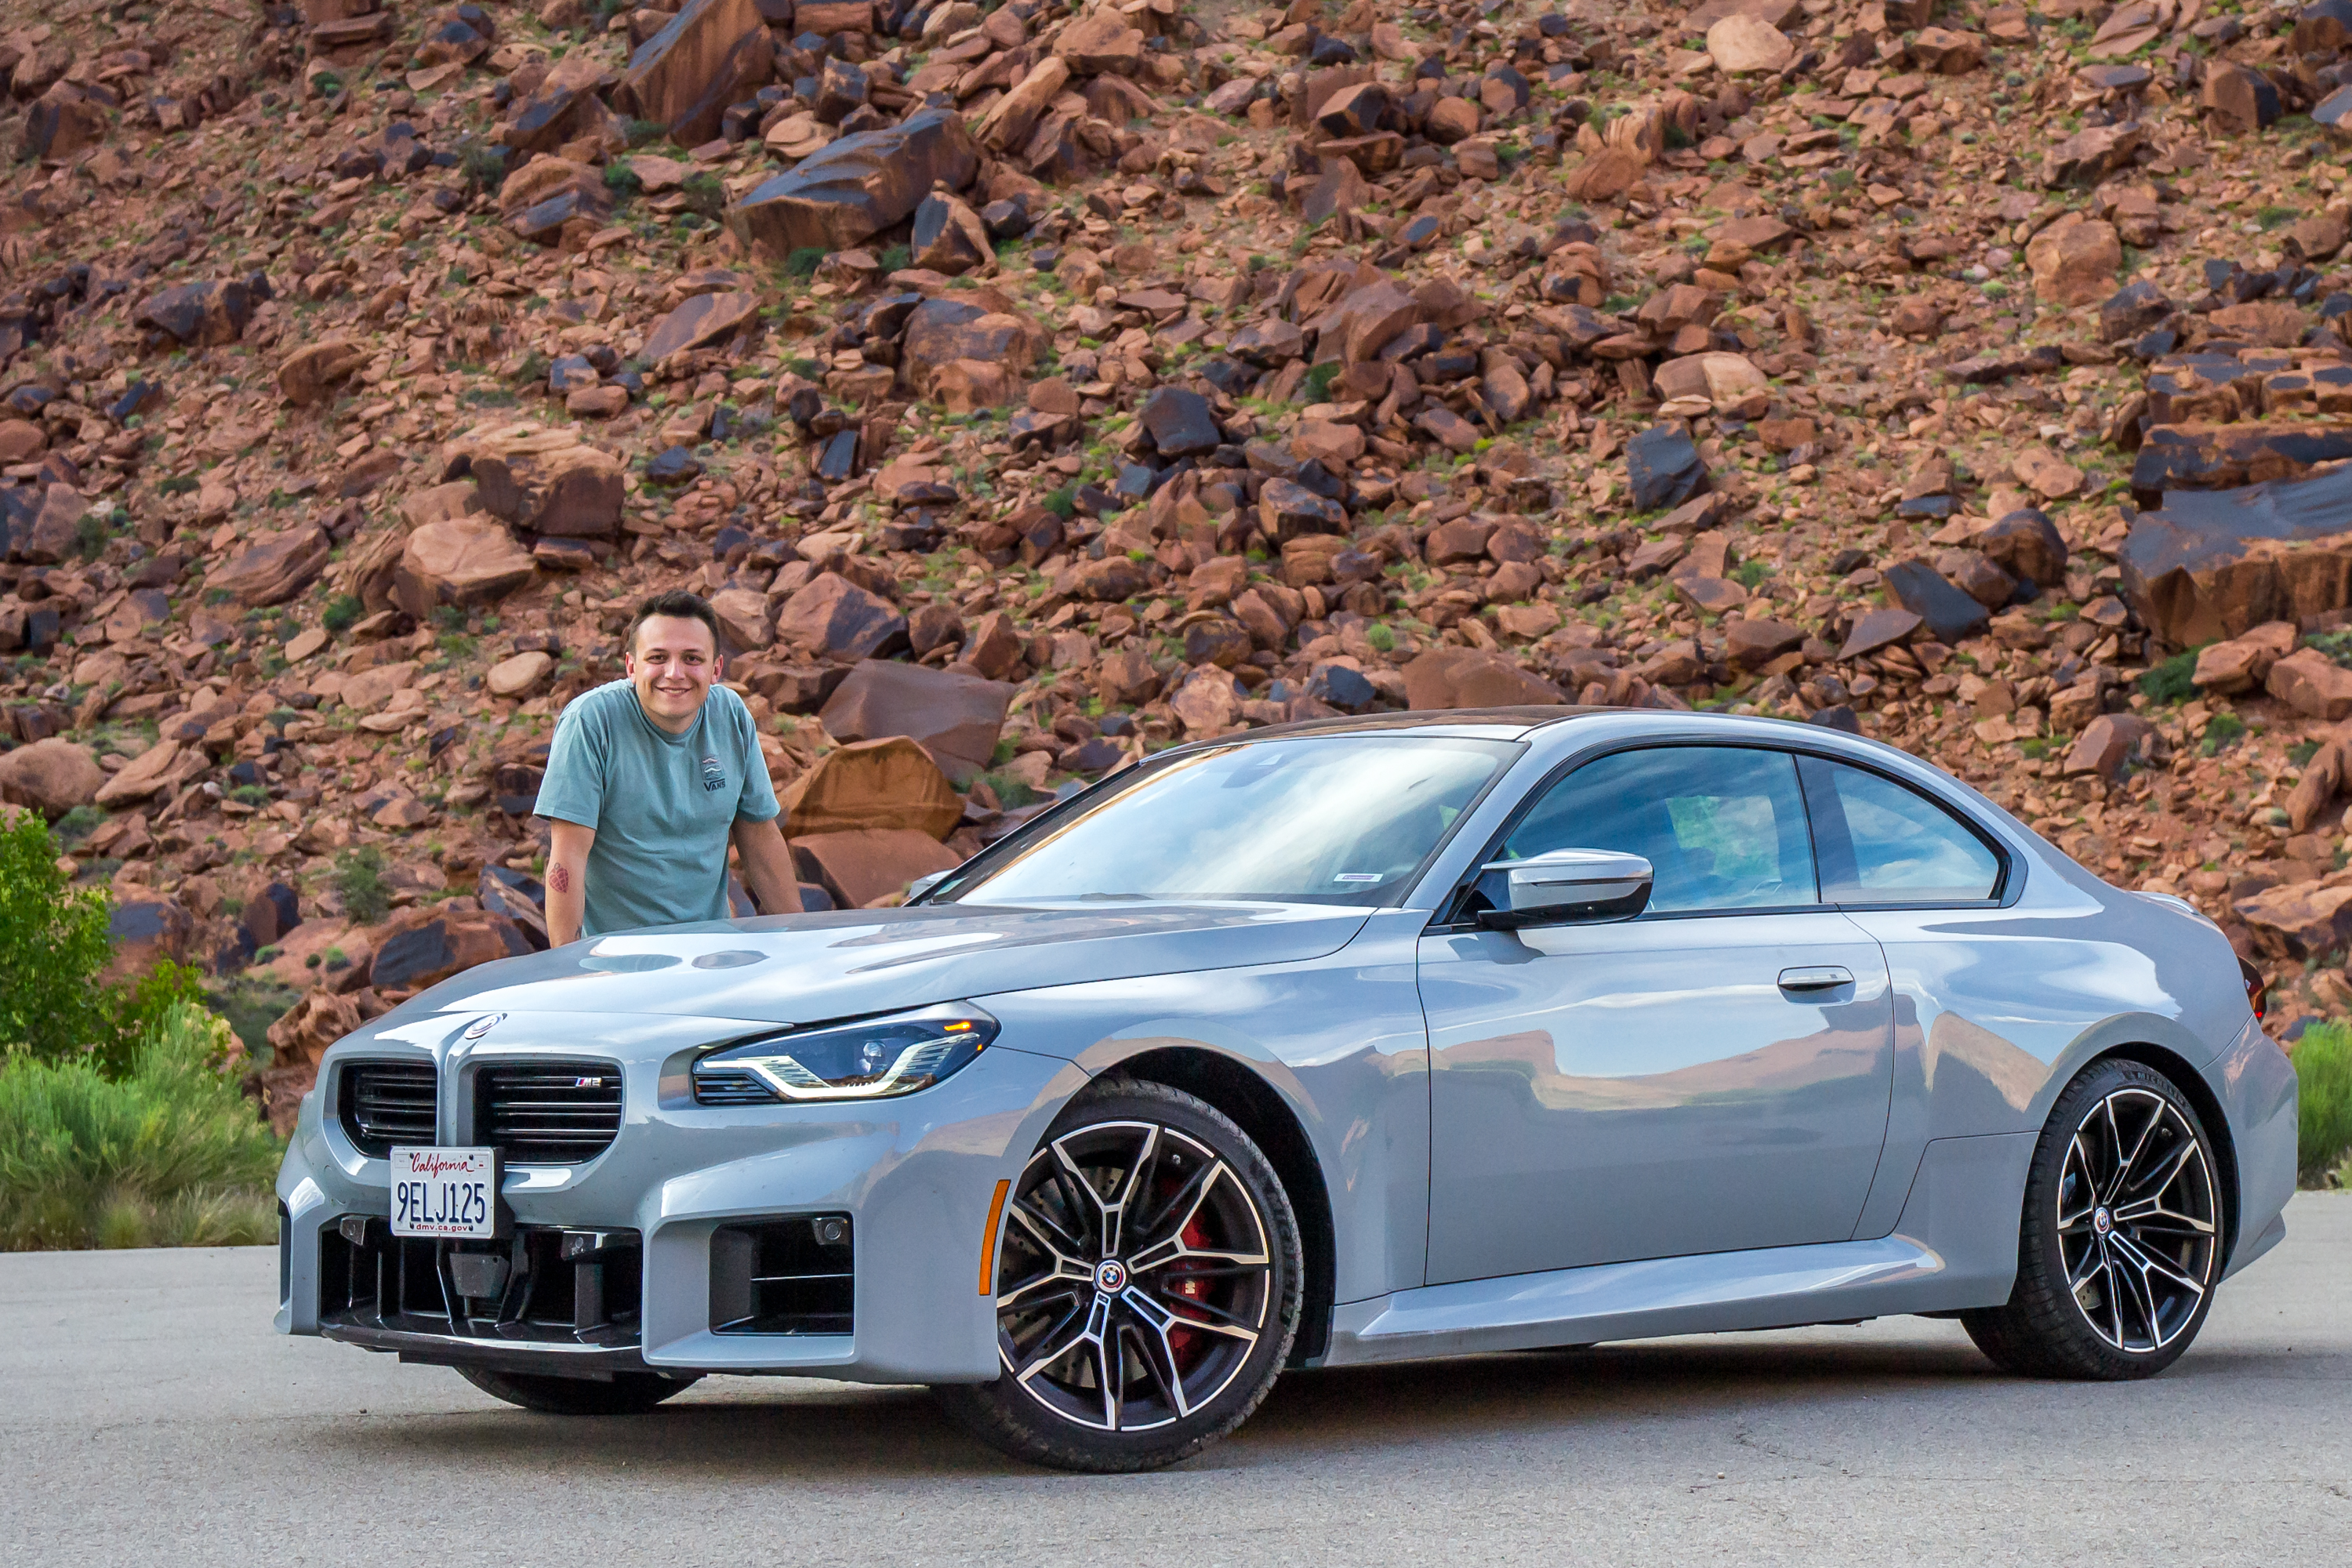 https://s1.cdn.autoevolution.com/images/news/2023-bmw-m2-driven-why-not-take-the-sports-car-camping-216881_1.jpg